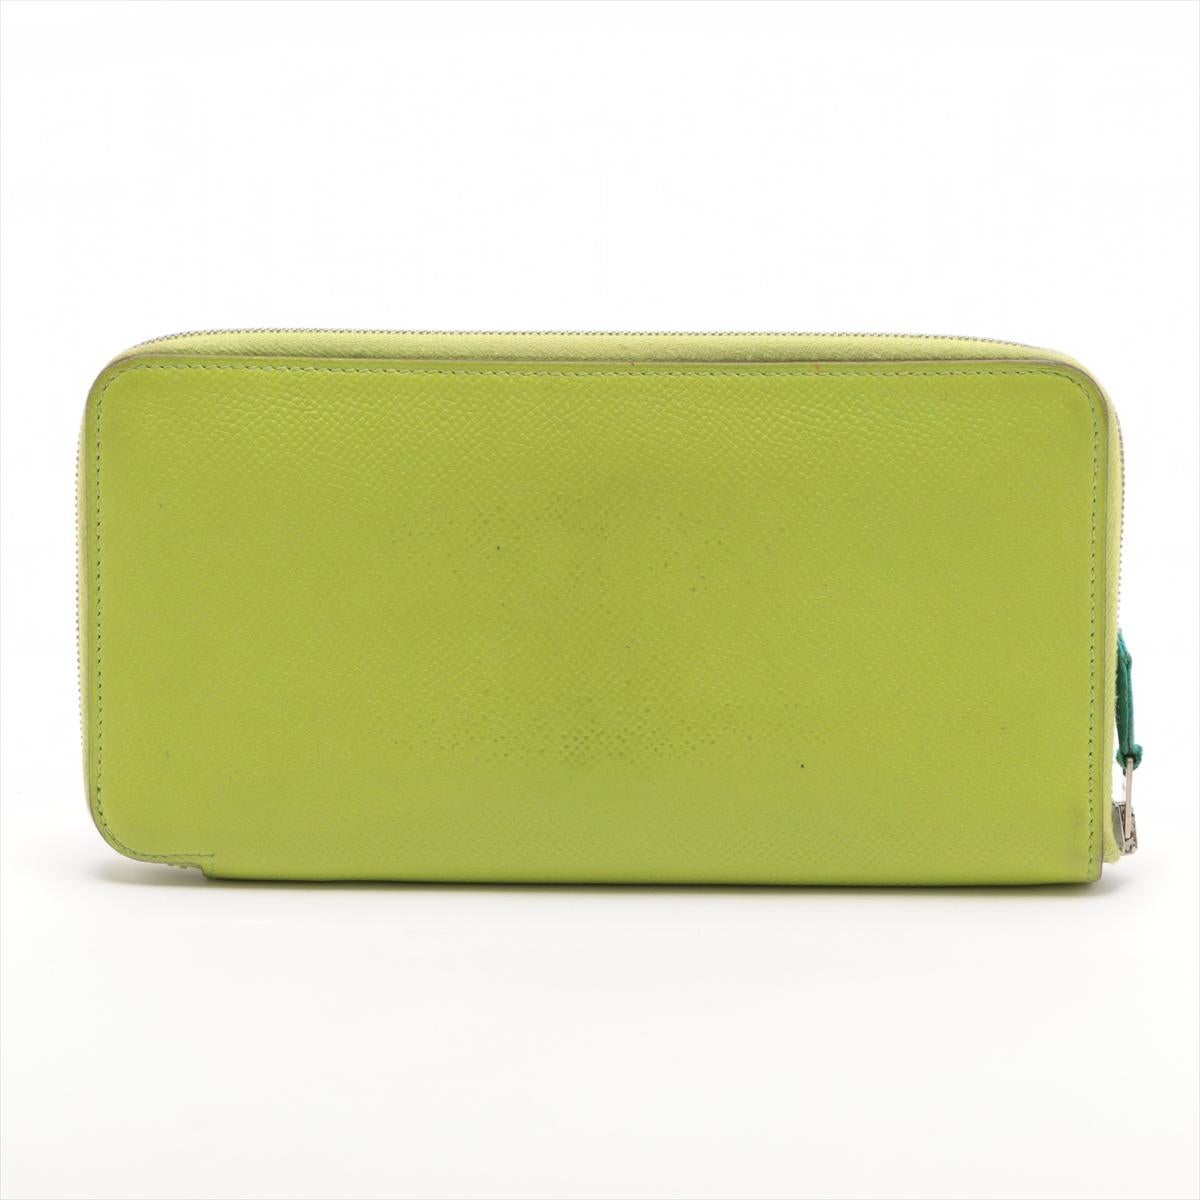 The Hermès Azap Veau Epsom Long Zippy Wallet in Apple Green is a luxurious and practical accessory that exudes sophistication. Crafted from high-quality Veau Epsom leather, known for its durability and distinctive grain, the wallet showcases Hermès'